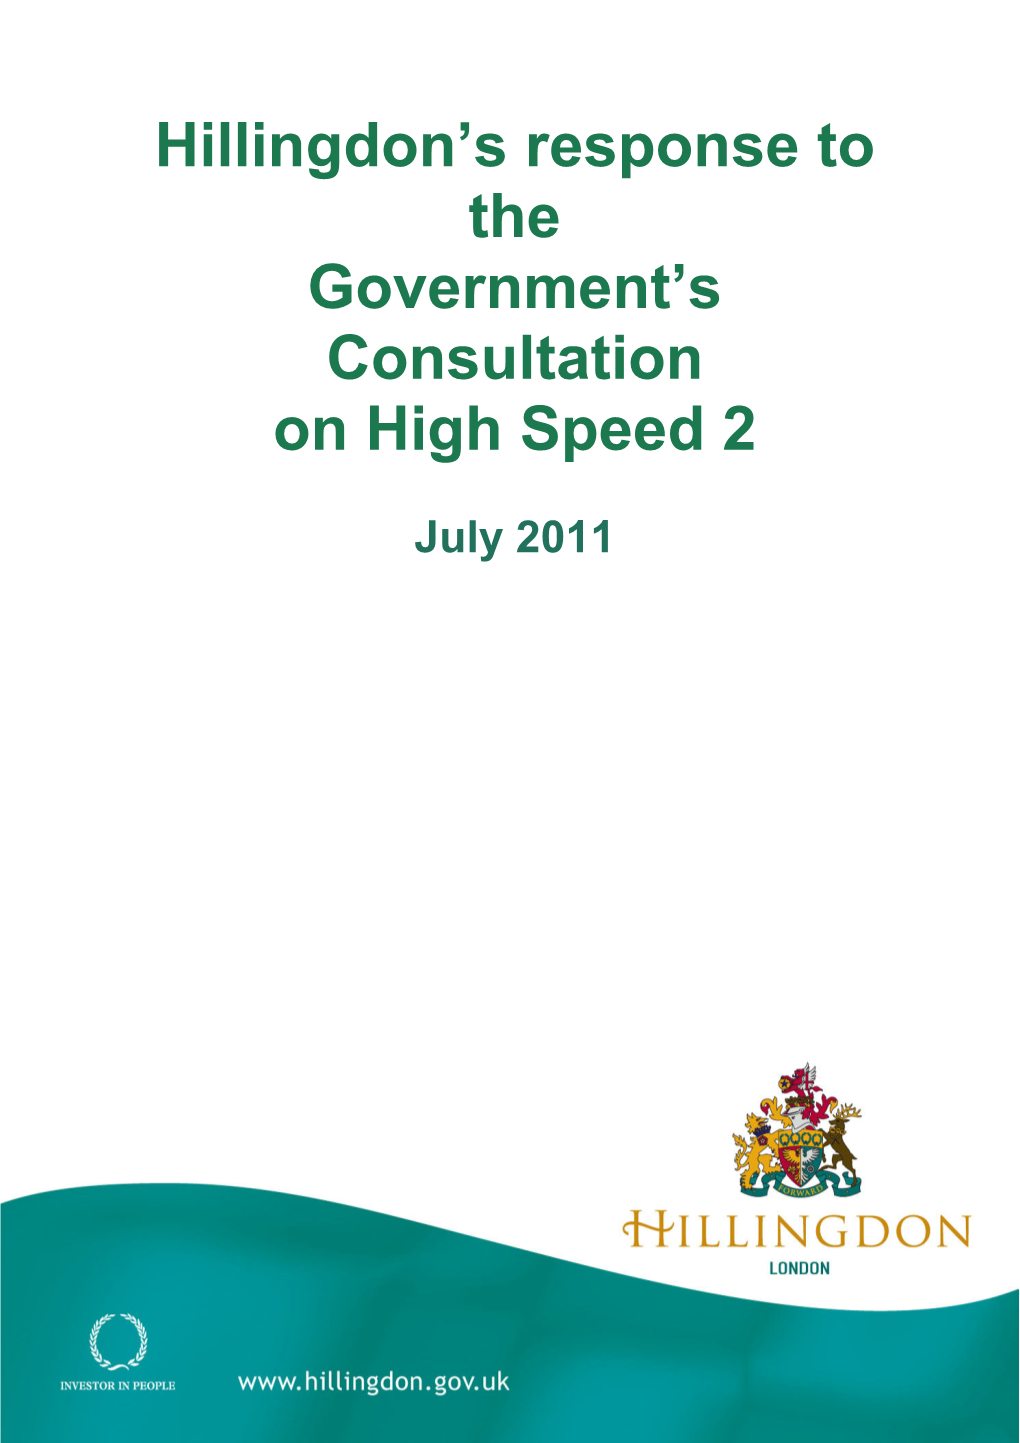 Hillingdon's Response to the Government's Consultation on High Speed 2